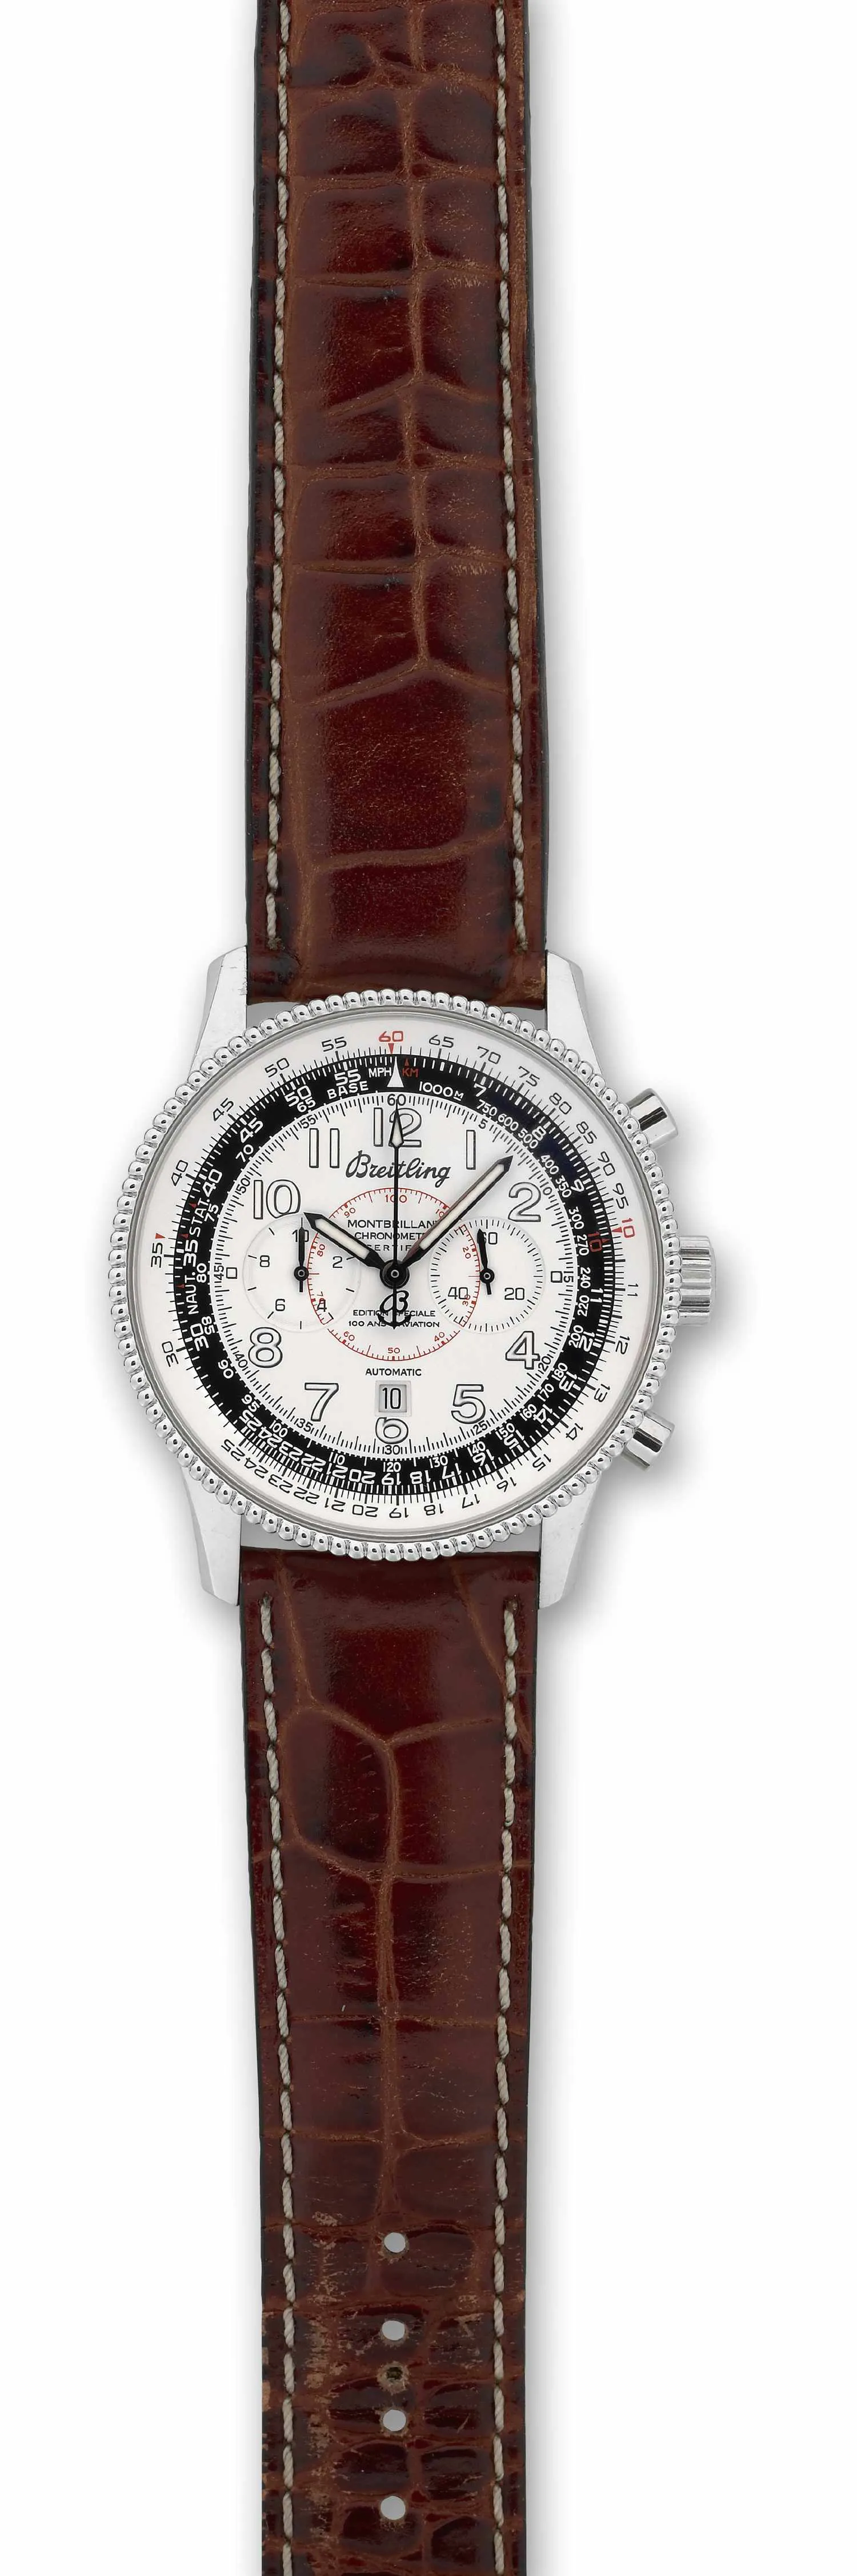 Breitling Montbrillant A35330 42mm Stainless steel bi-color black and silver